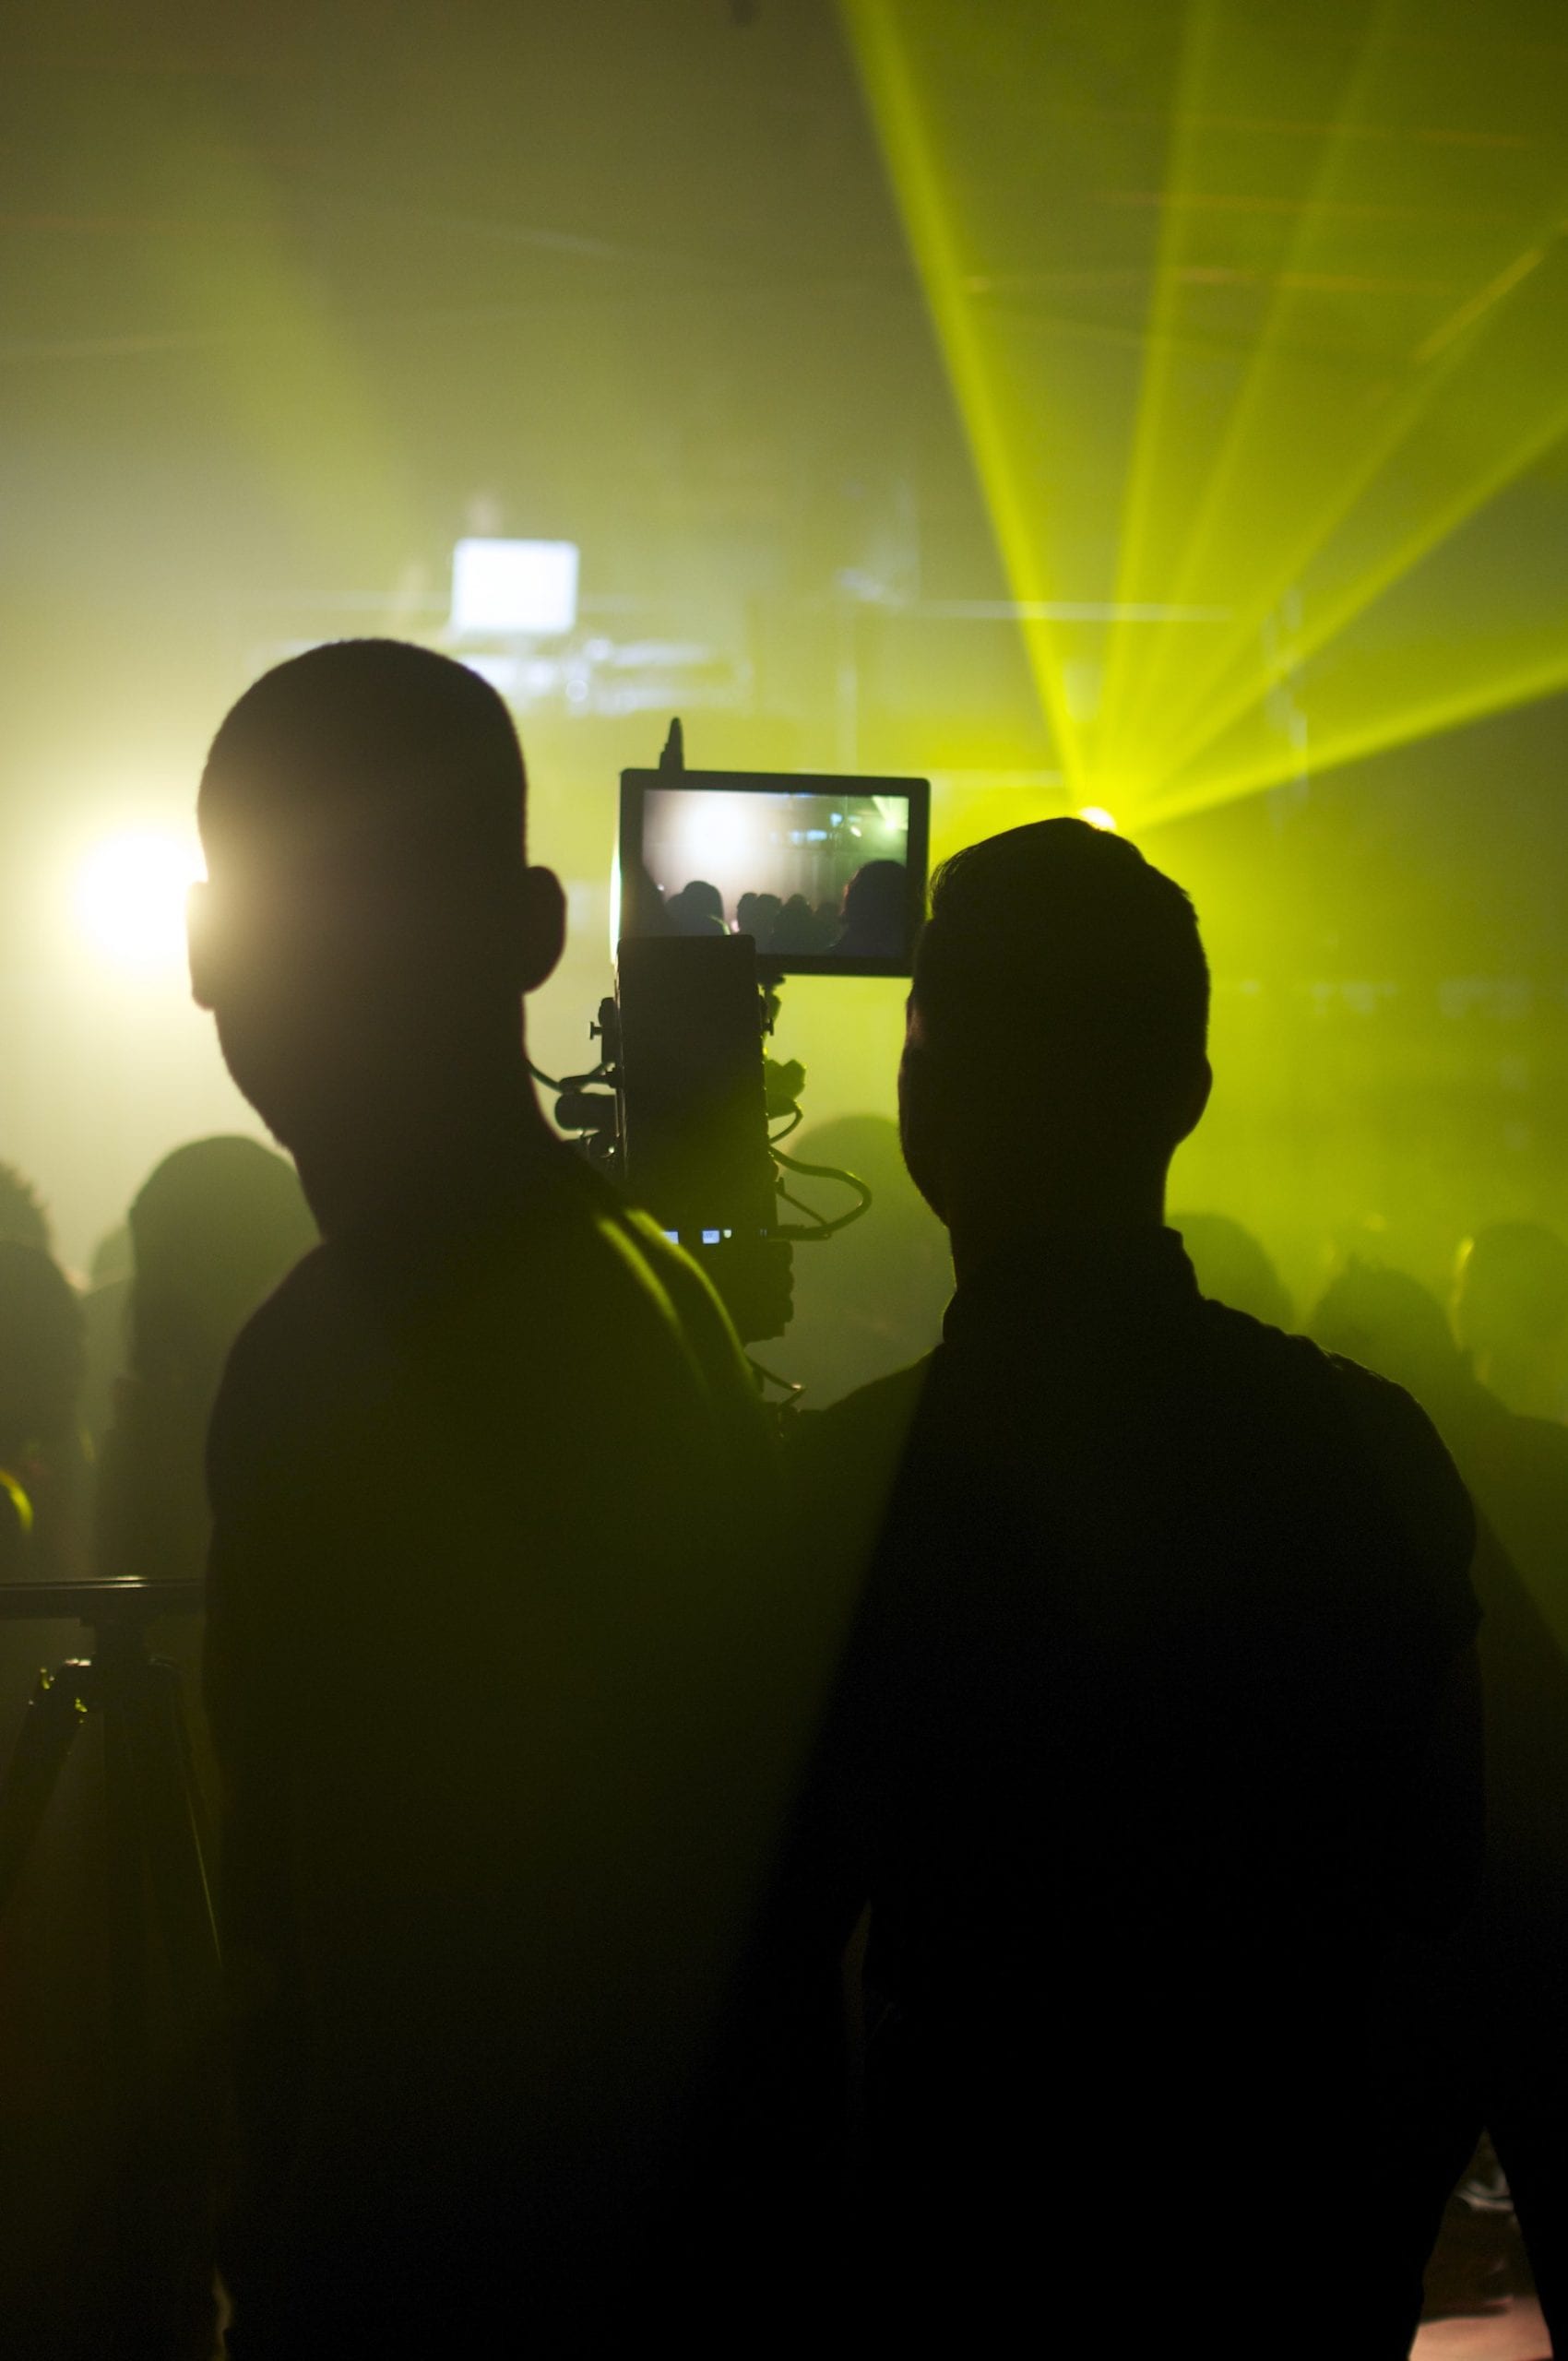 View from behind silhouette of two video camera operators filming a concert basked in yellow light